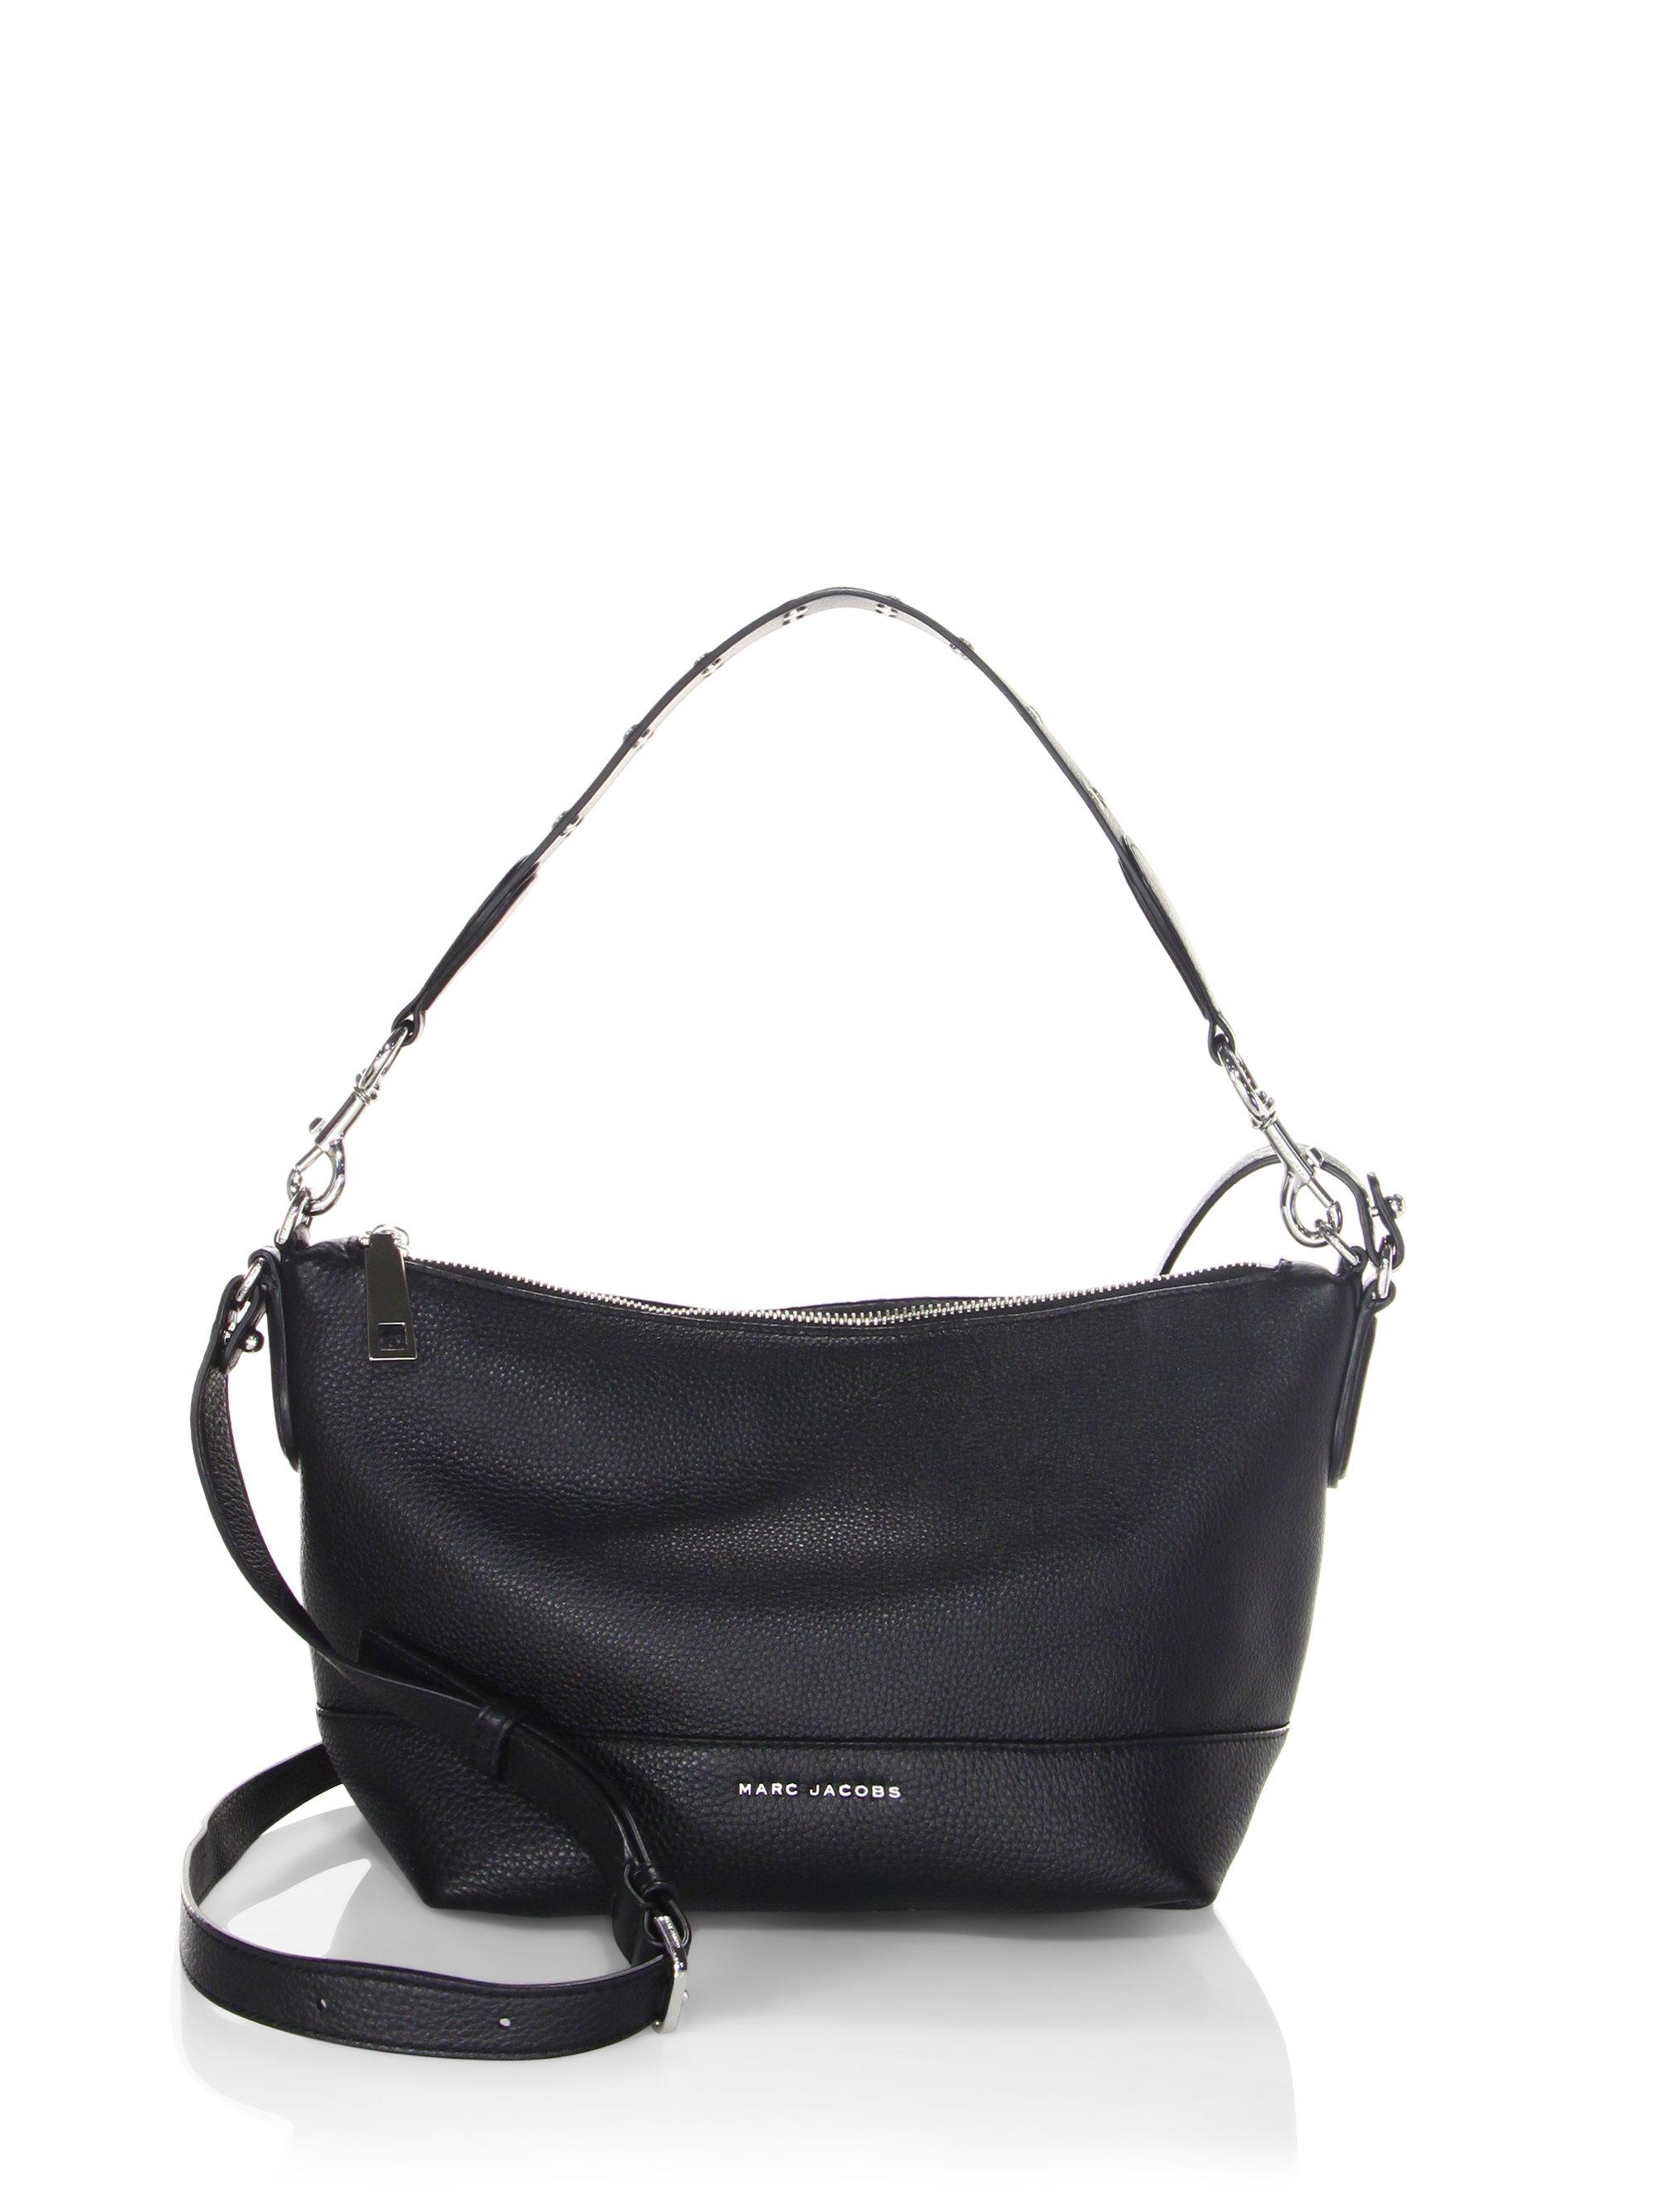 Marc Jacobs Small Grip Leather Crossbody Bag in Black - Lyst